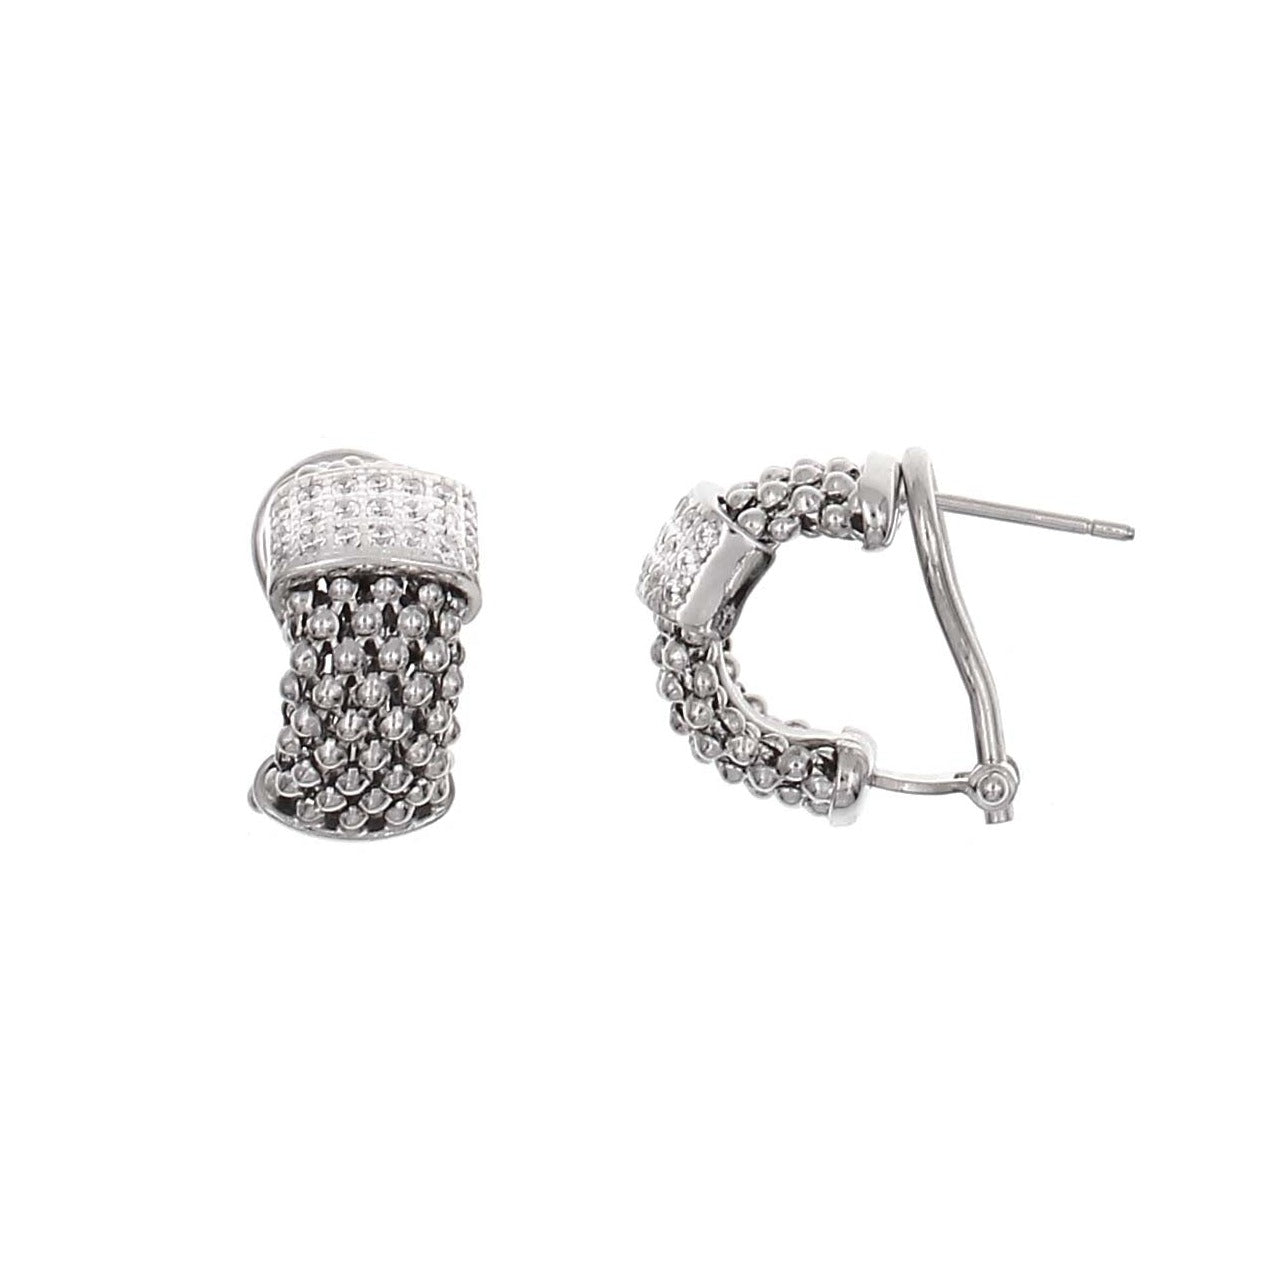 Luxury Textured Woven Sparkly Earrings